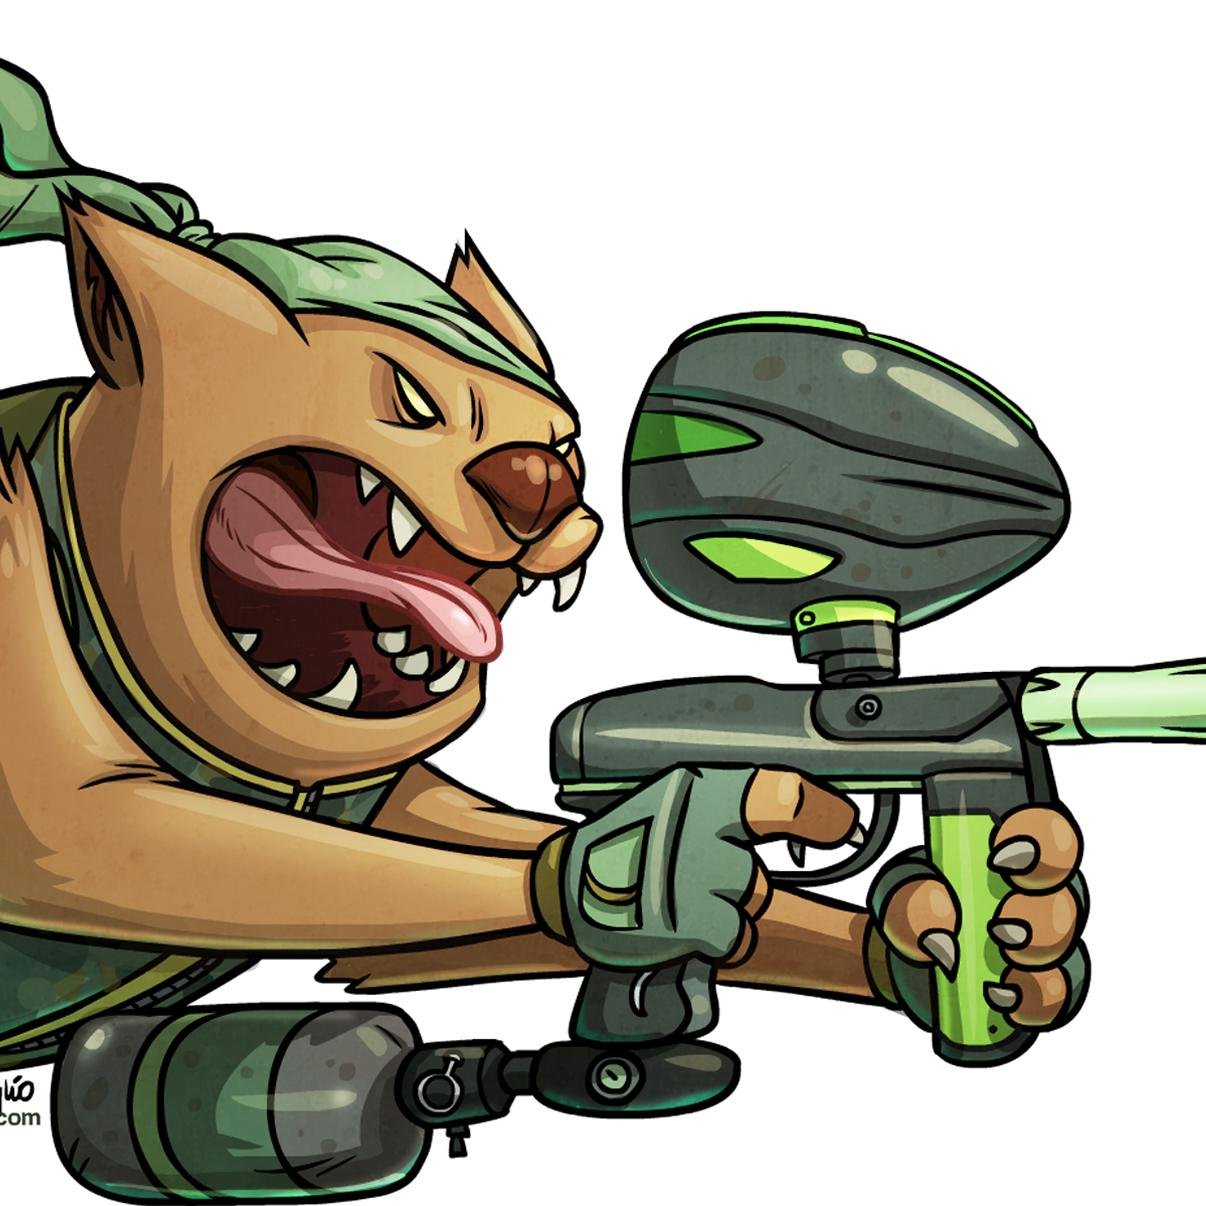 Stop by the Screaming, Flying, Wicked Wombat Burrow for some pulse-raising paintball!